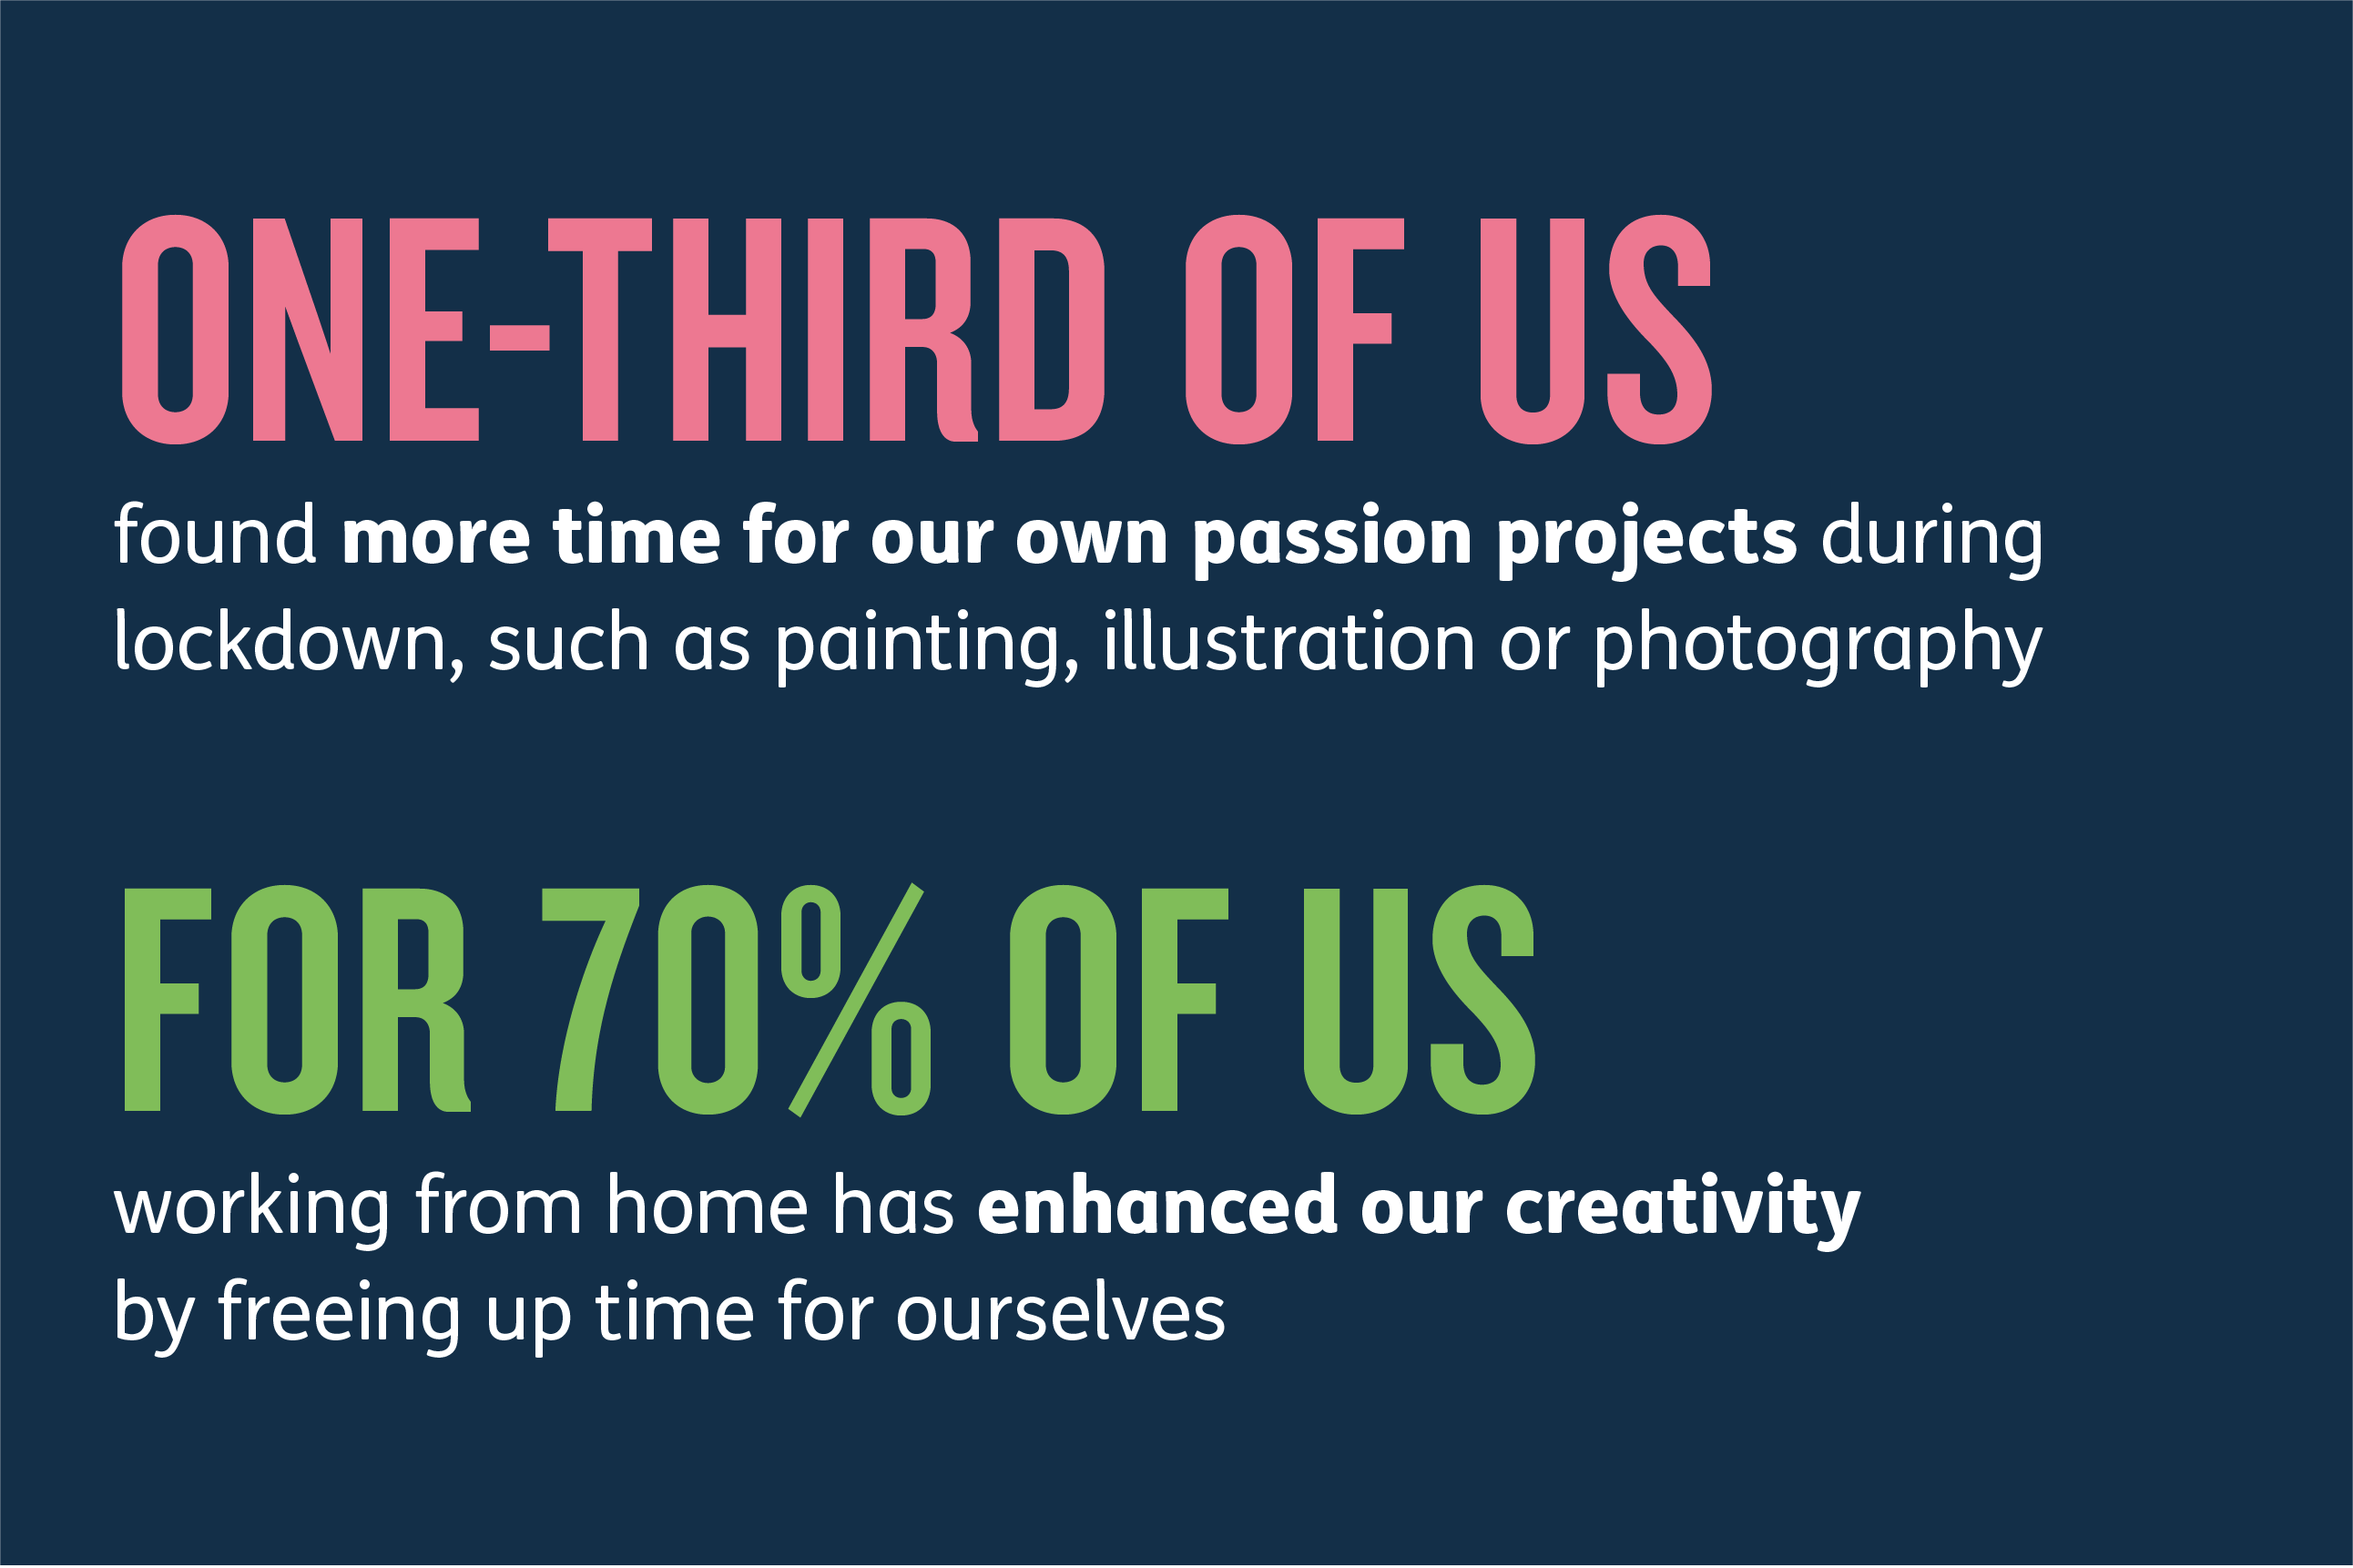 One-third of us found more time for our own passion projects during lockdown, such as painting, illustration or photography. For 70% of us working from home has enhanced our creativity by freeing up time for ourselves